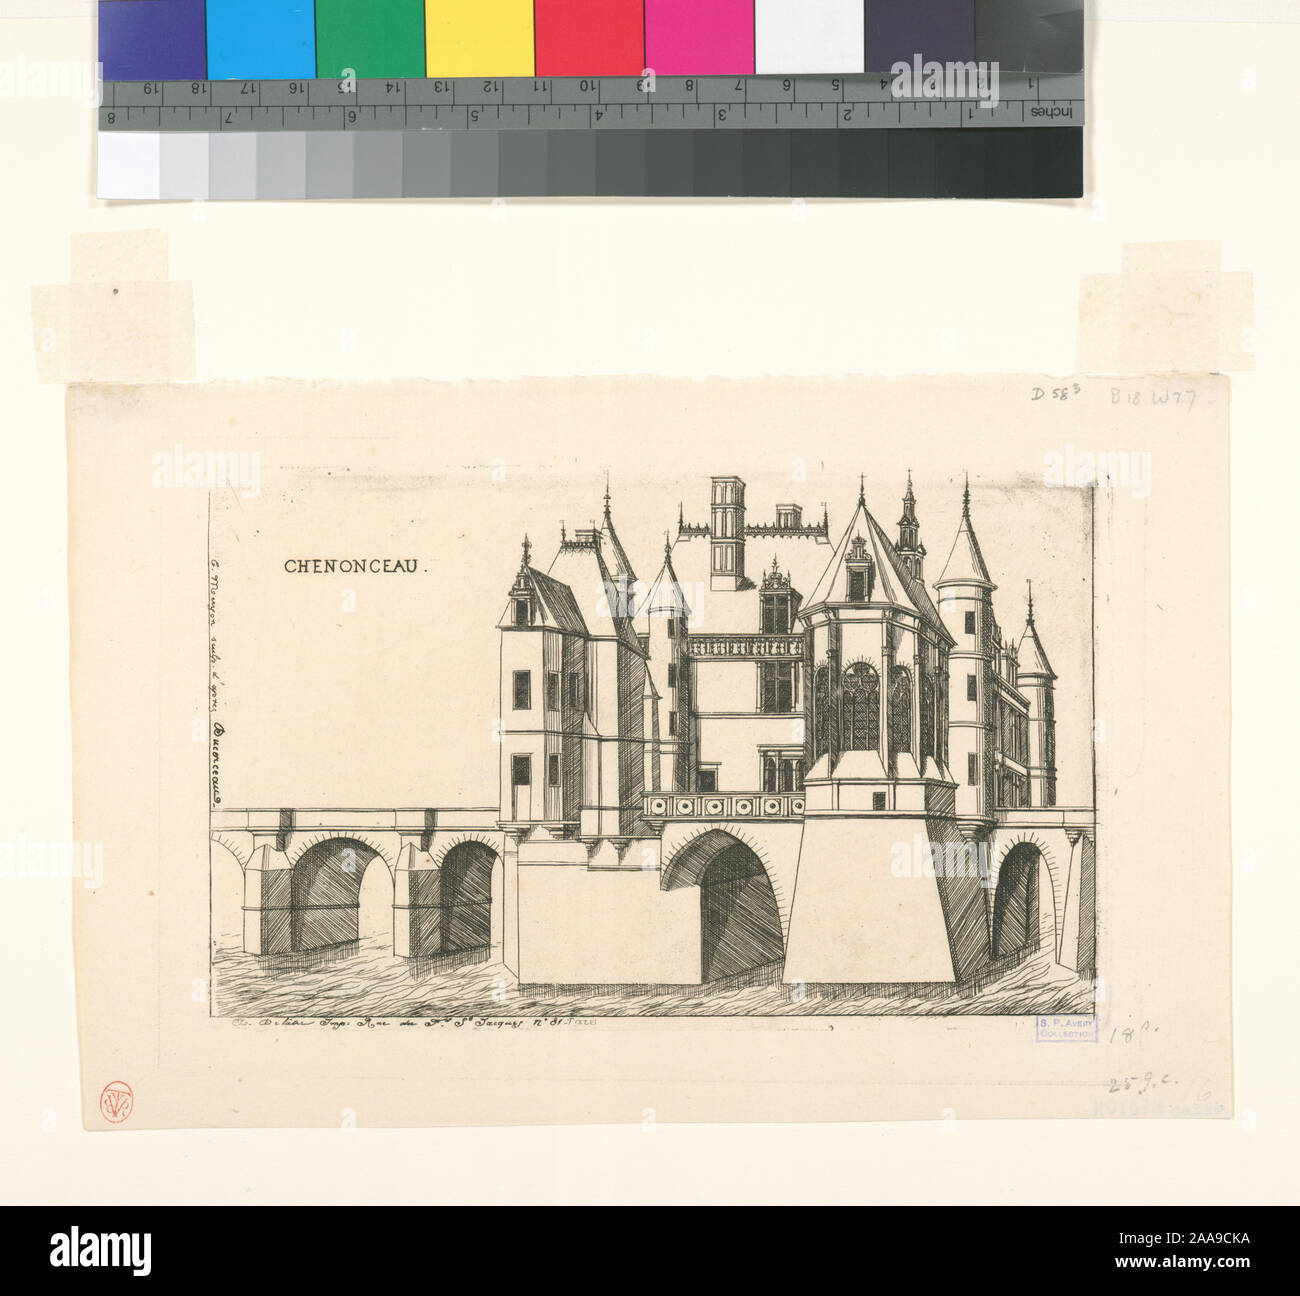 Admission is granted through application to the Office of Special Collections. Architectural prints, some reproductive prints after Jacques Androuet du Cerceau, Eugene-Emmanuel Viollet-le-Duc, Polycles Langlois and Jacques-Phillipe le Bas, views of Athens, Bourges, Chenonceaux and Pierrefonds and other architectural structures and details including apses, castles, church buildings, columns, convents, doorways, monasteries, ruins and windows.  Other subjects include flageolets, medieval costumes and soldiers.  One print depicts a map of the battle positions of Russian and Turkish fleets at Sino Stock Photo